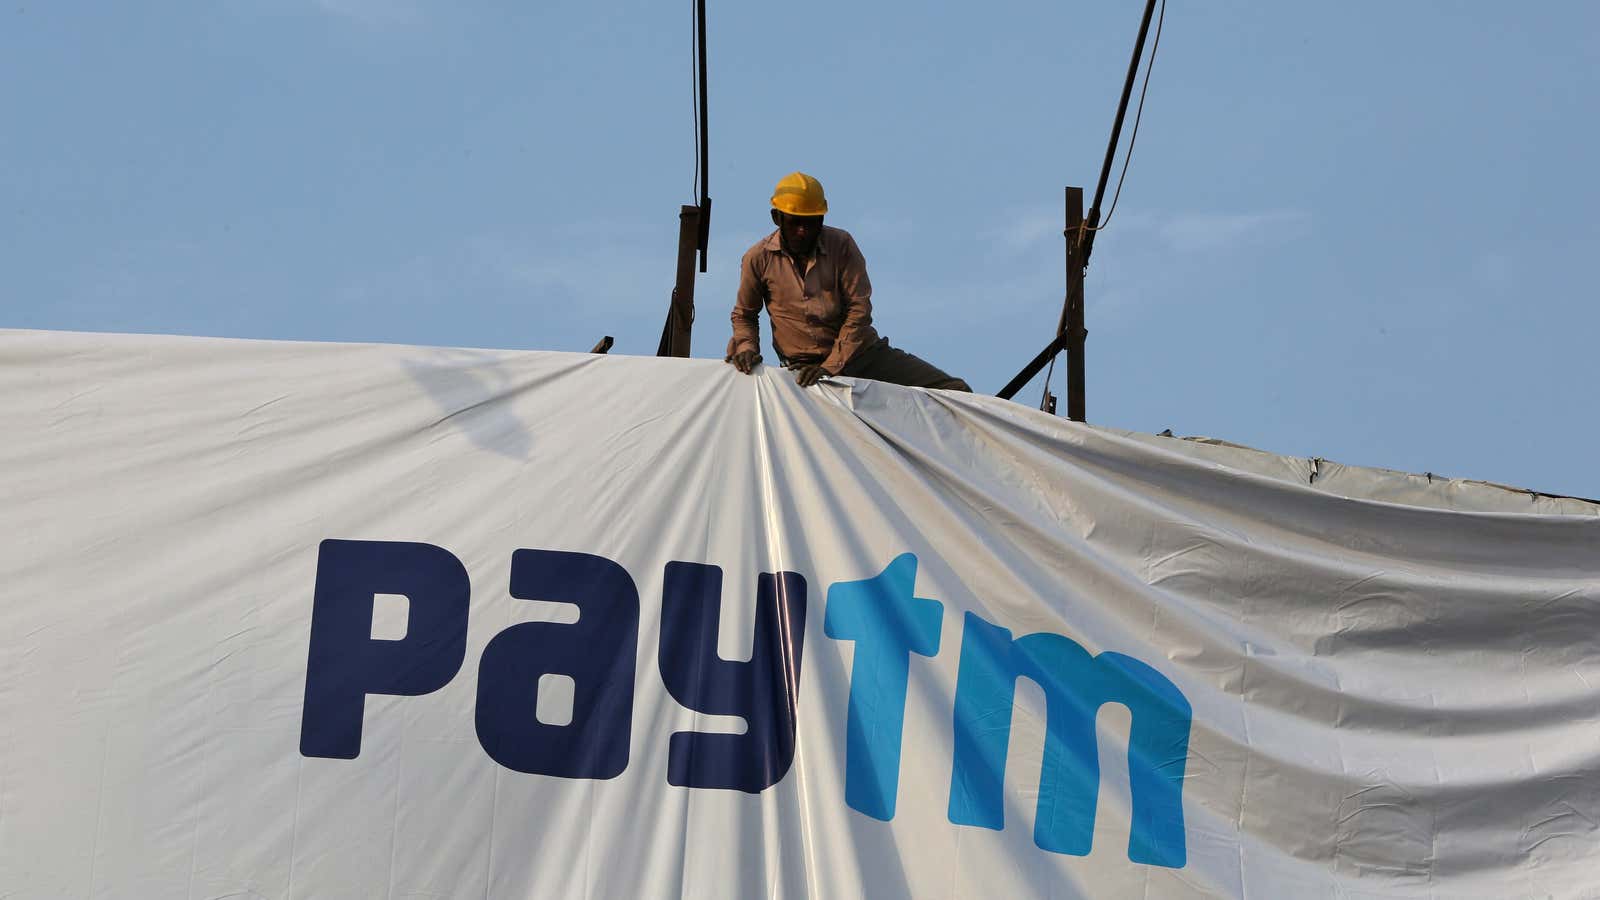 A worker adjusts a hoarding of Paytm, a digital payments firm, in Ahmedabad, India, January 31, 2019. Picture taken January 31, 2019. REUTERS/Amit Dave